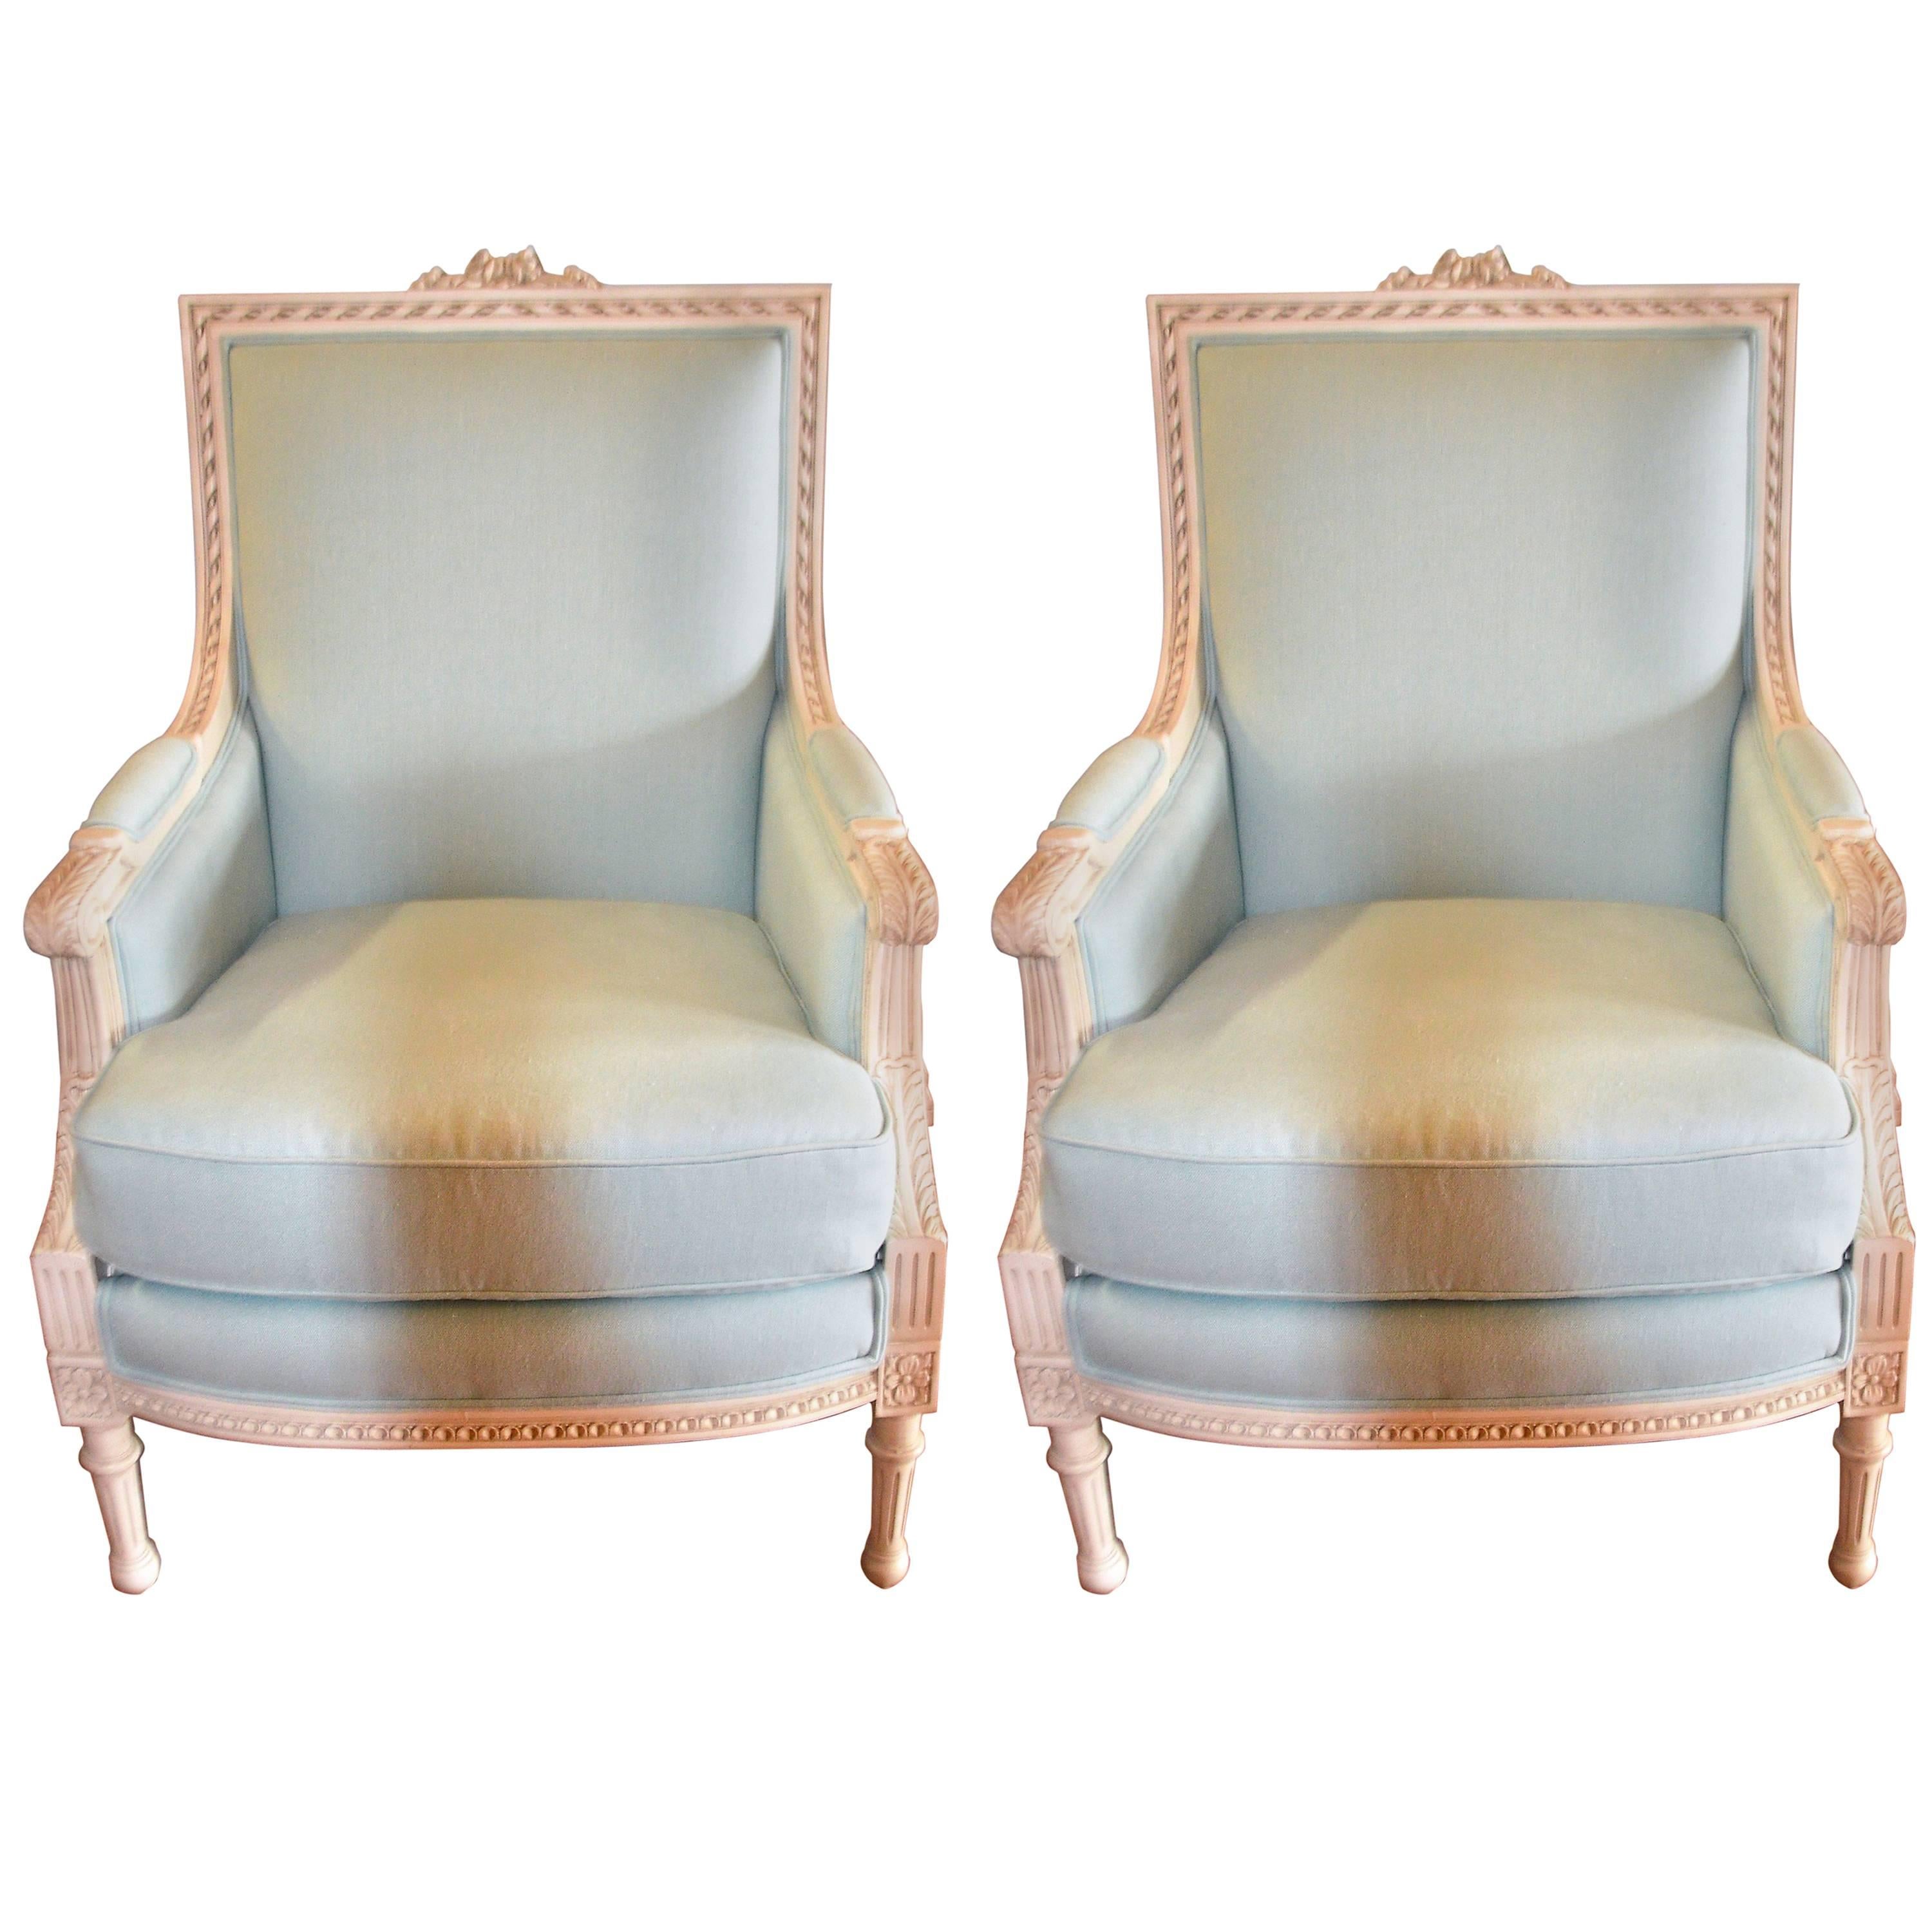 Pair of Louis XVI Style Painted Bergeres Chairs